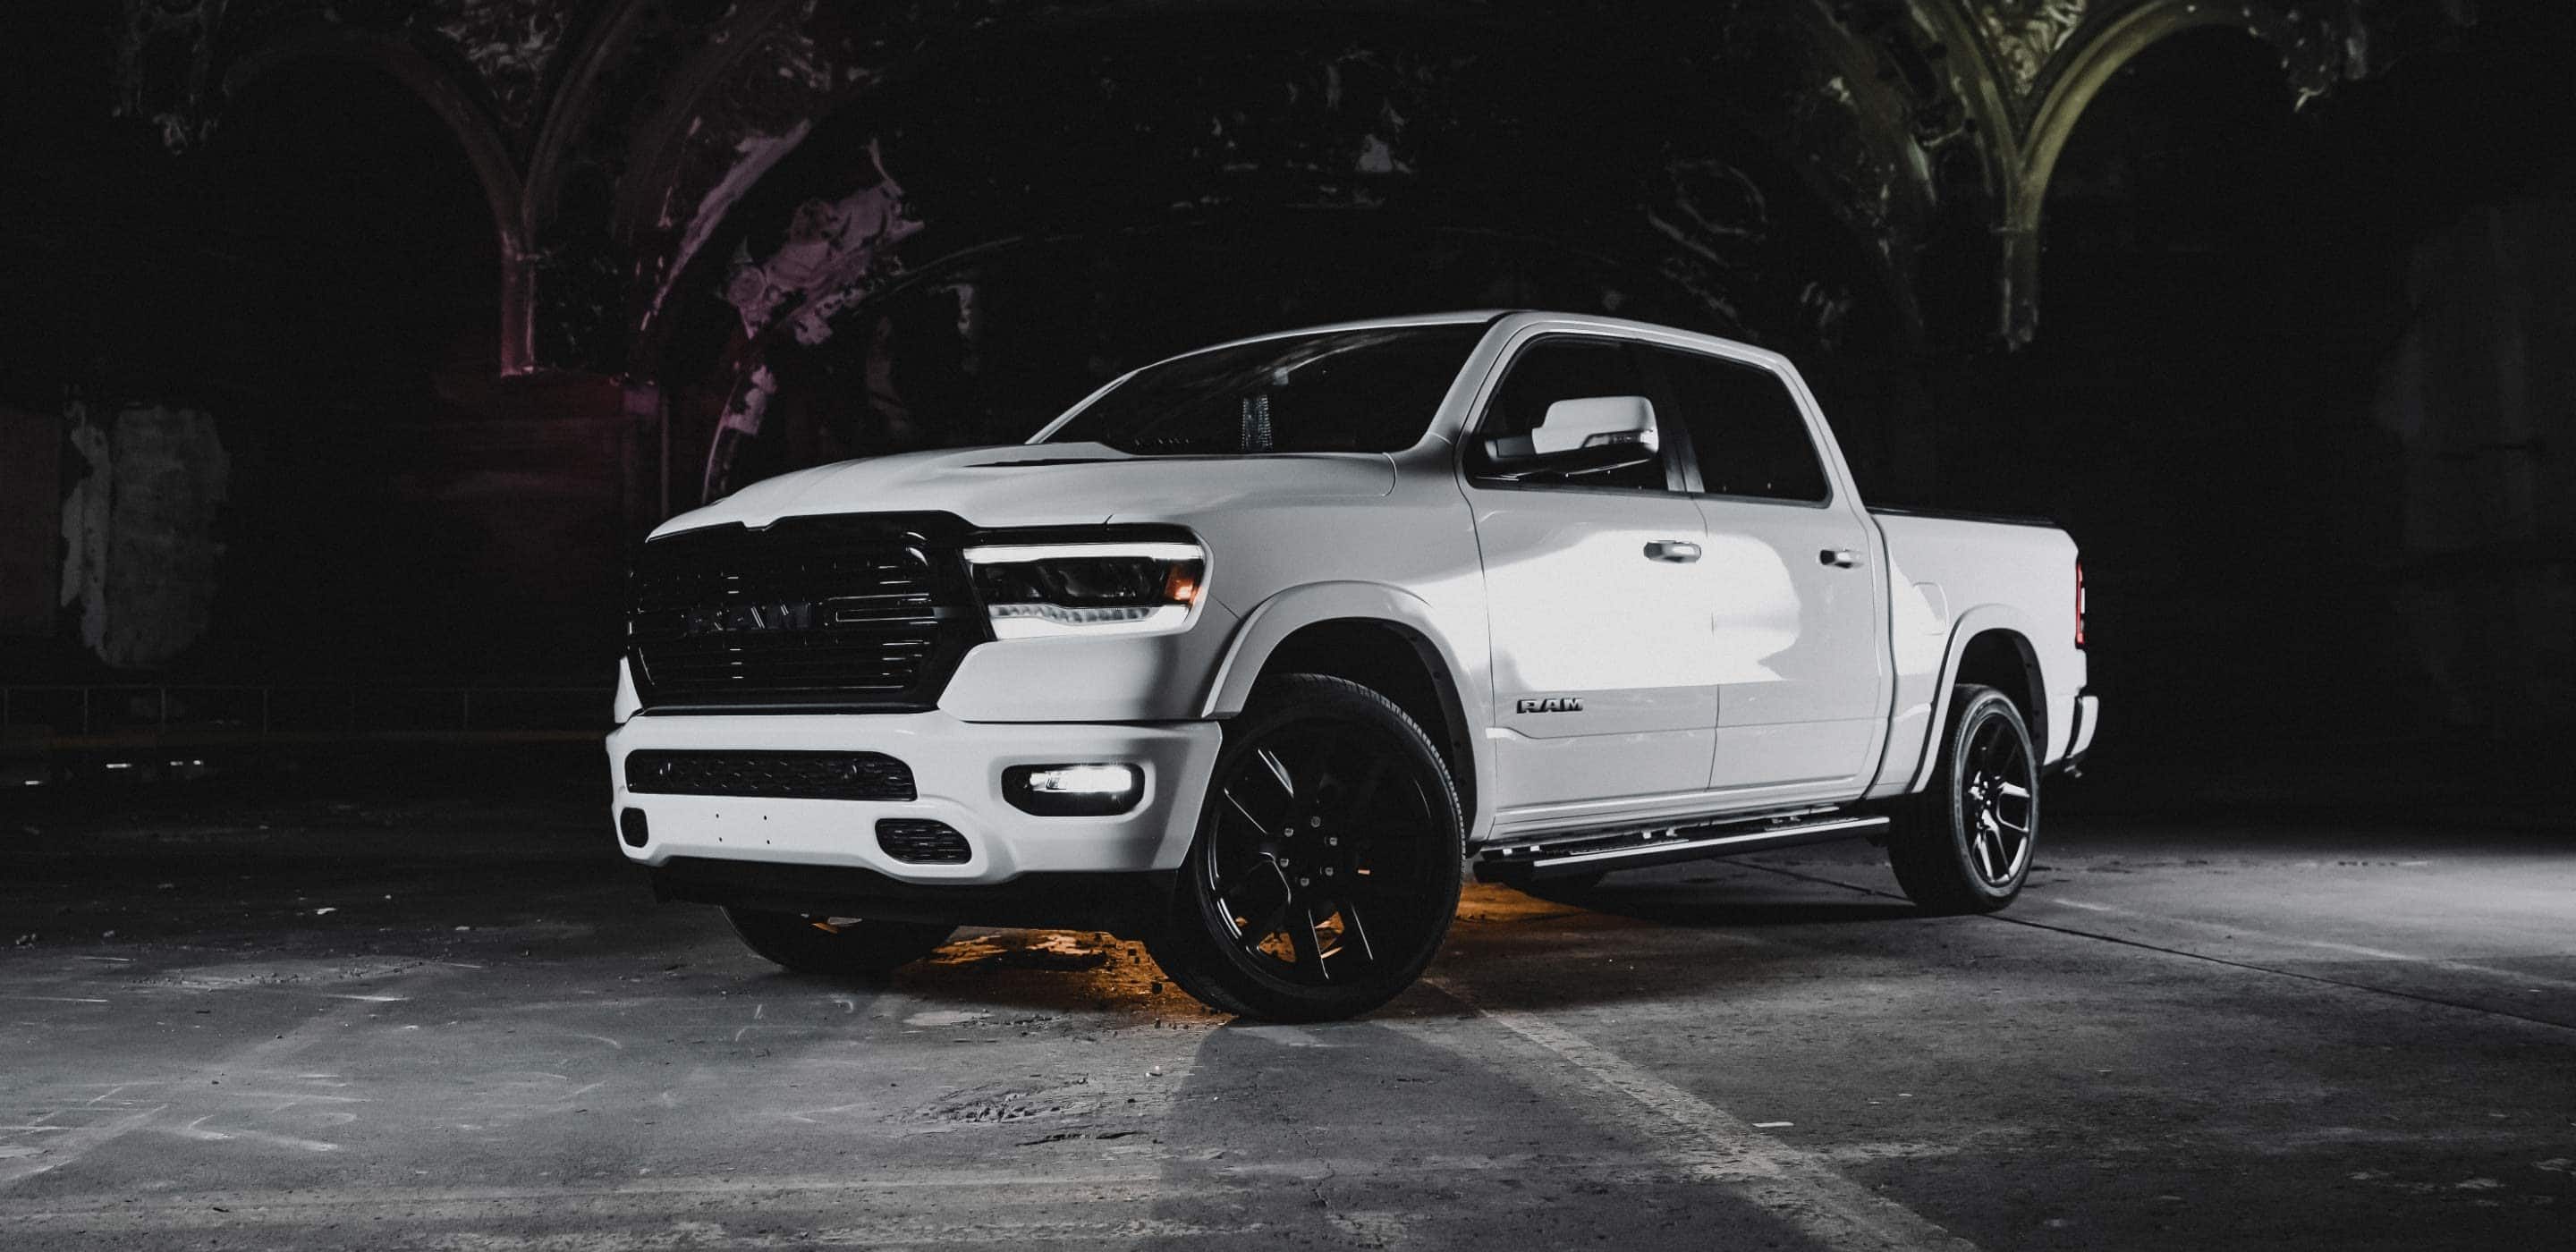 What's New for the 2021 Ram 1500